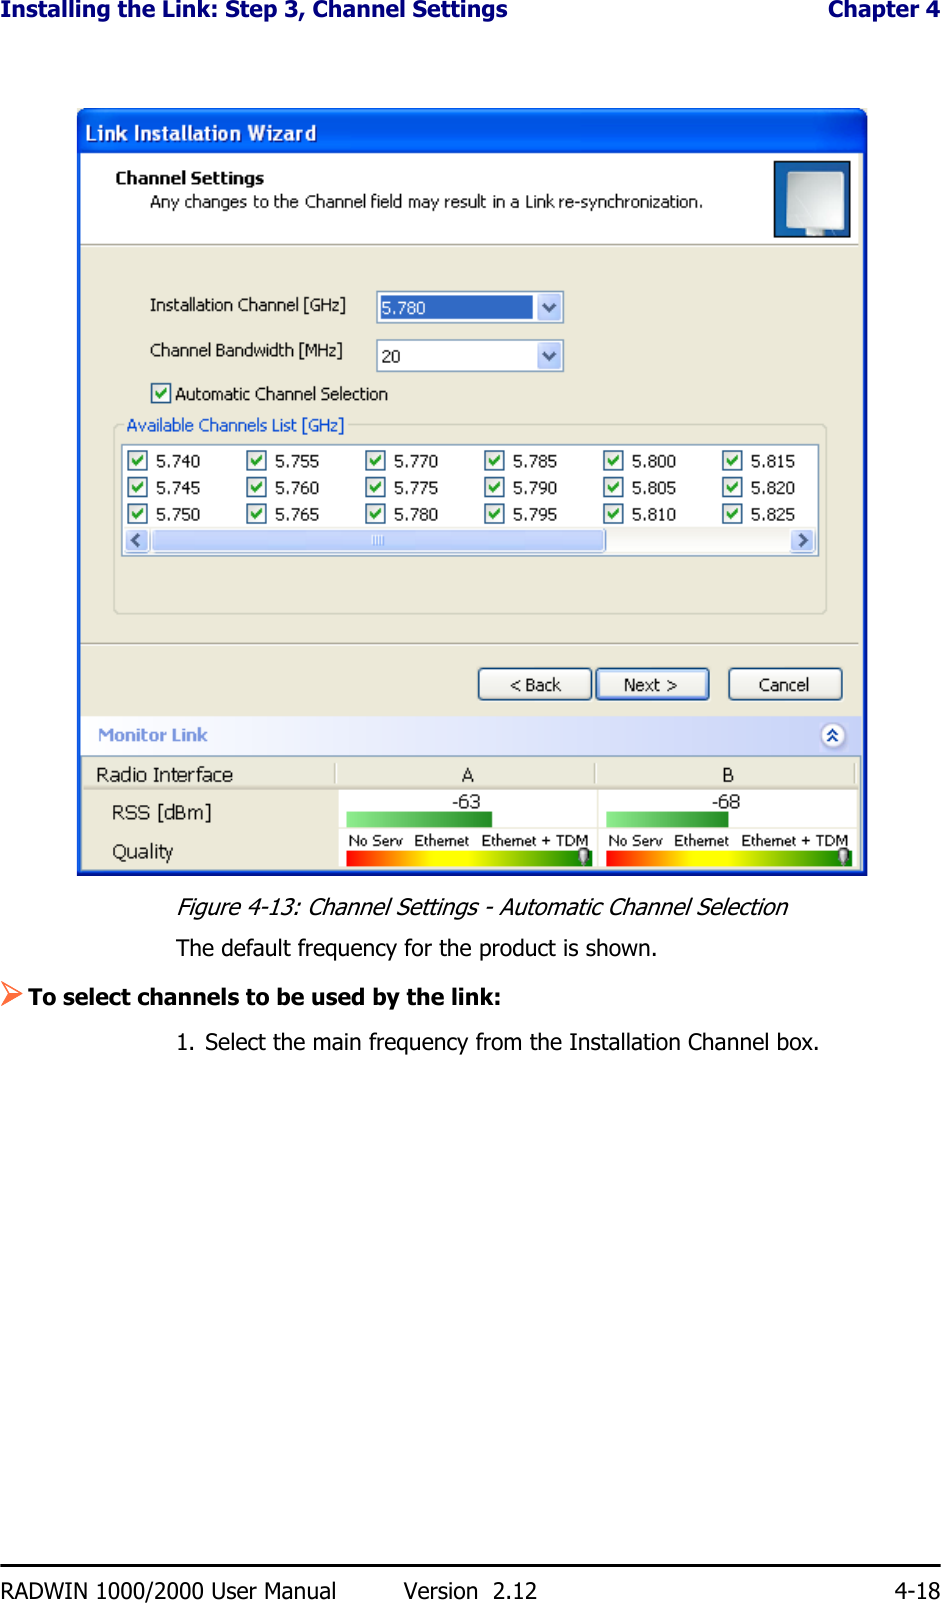 Installing the Link: Step 3, Channel Settings  Chapter 4RADWIN 1000/2000 User Manual Version  2.12 4-18Figure 4-13: Channel Settings - Automatic Channel SelectionThe default frequency for the product is shown.¾To select channels to be used by the link:1. Select the main frequency from the Installation Channel box.